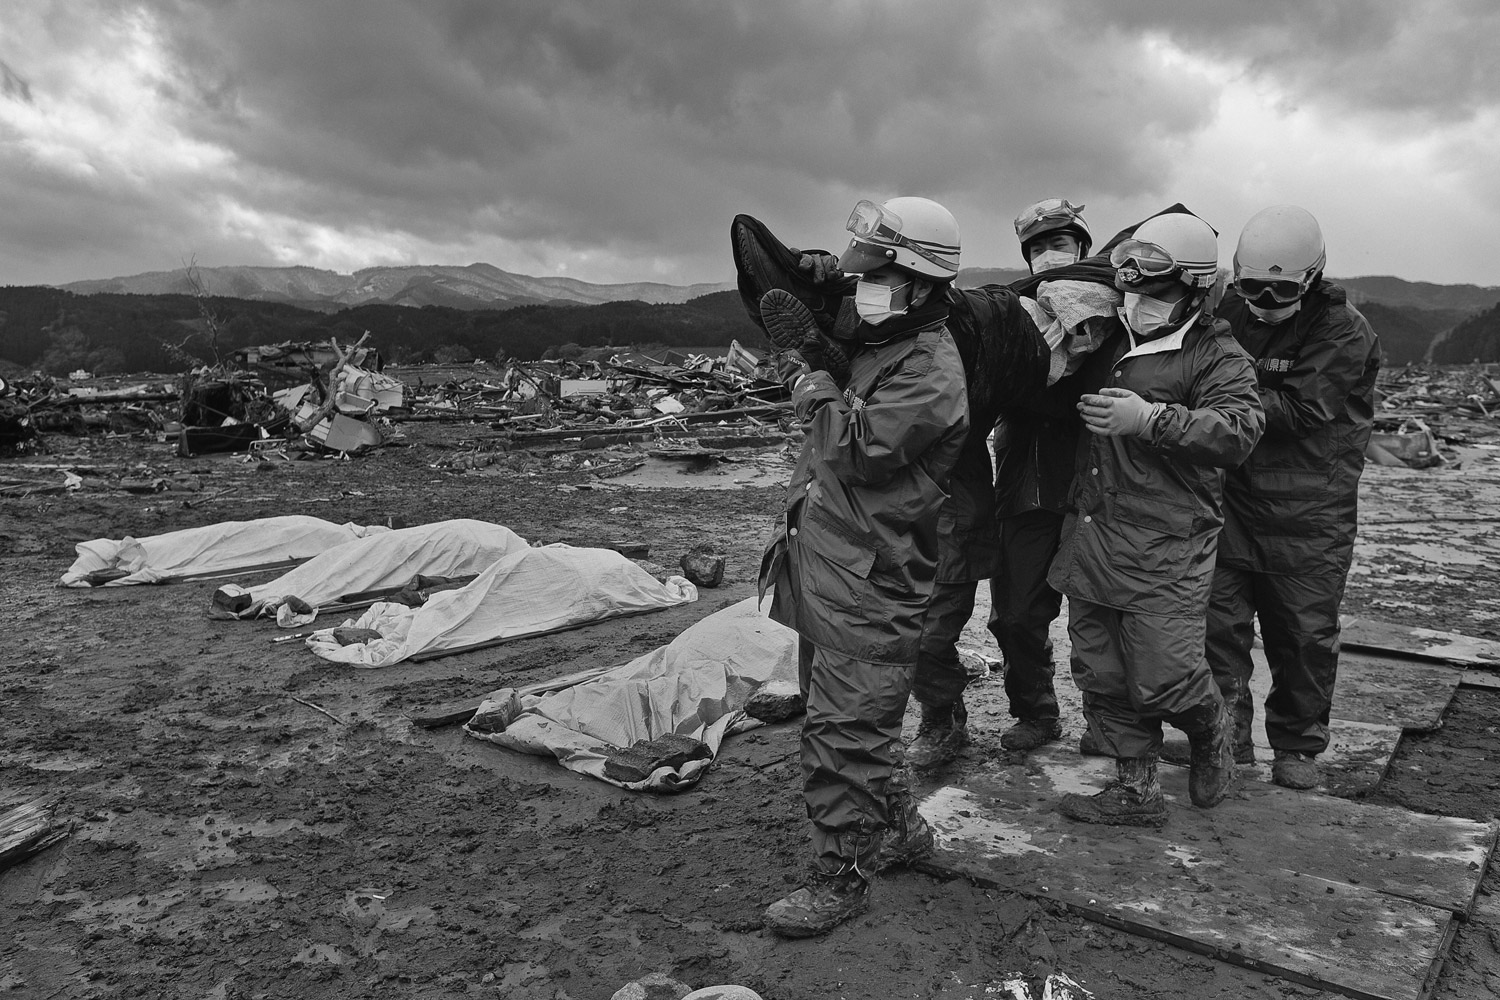 James Nachtwey. From  The Day the Earth Moved.  March 28, 2011 issue.
                              Under harsh conditions, police officers work to recover the remains of the dead in Rikuzentakata, Iwate prefecture, Japan, on March 16, 2011.